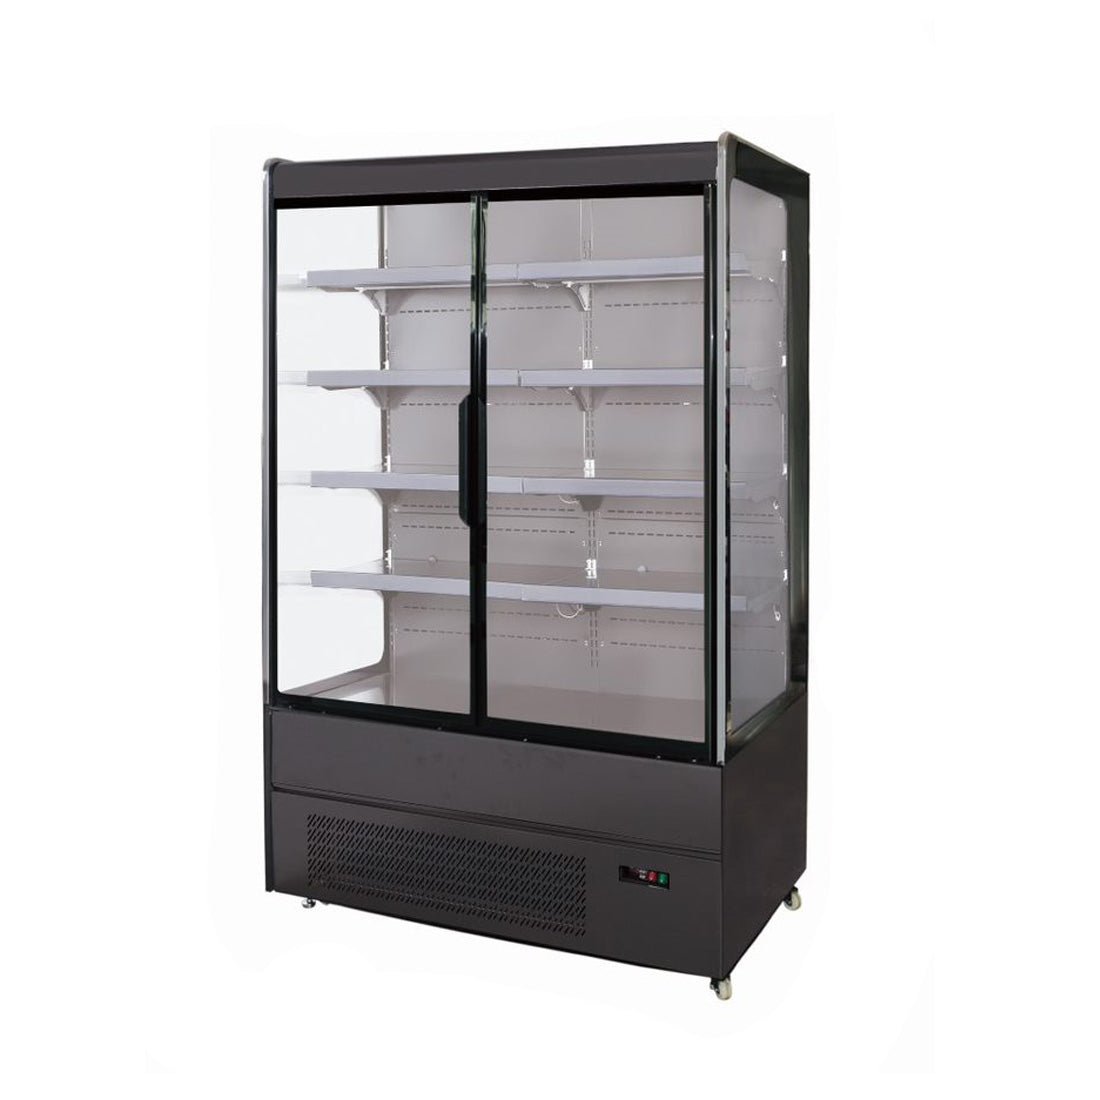 Bonvue 4 Shelves Open Chiller with Tempered Glass Doors - OD-2080P